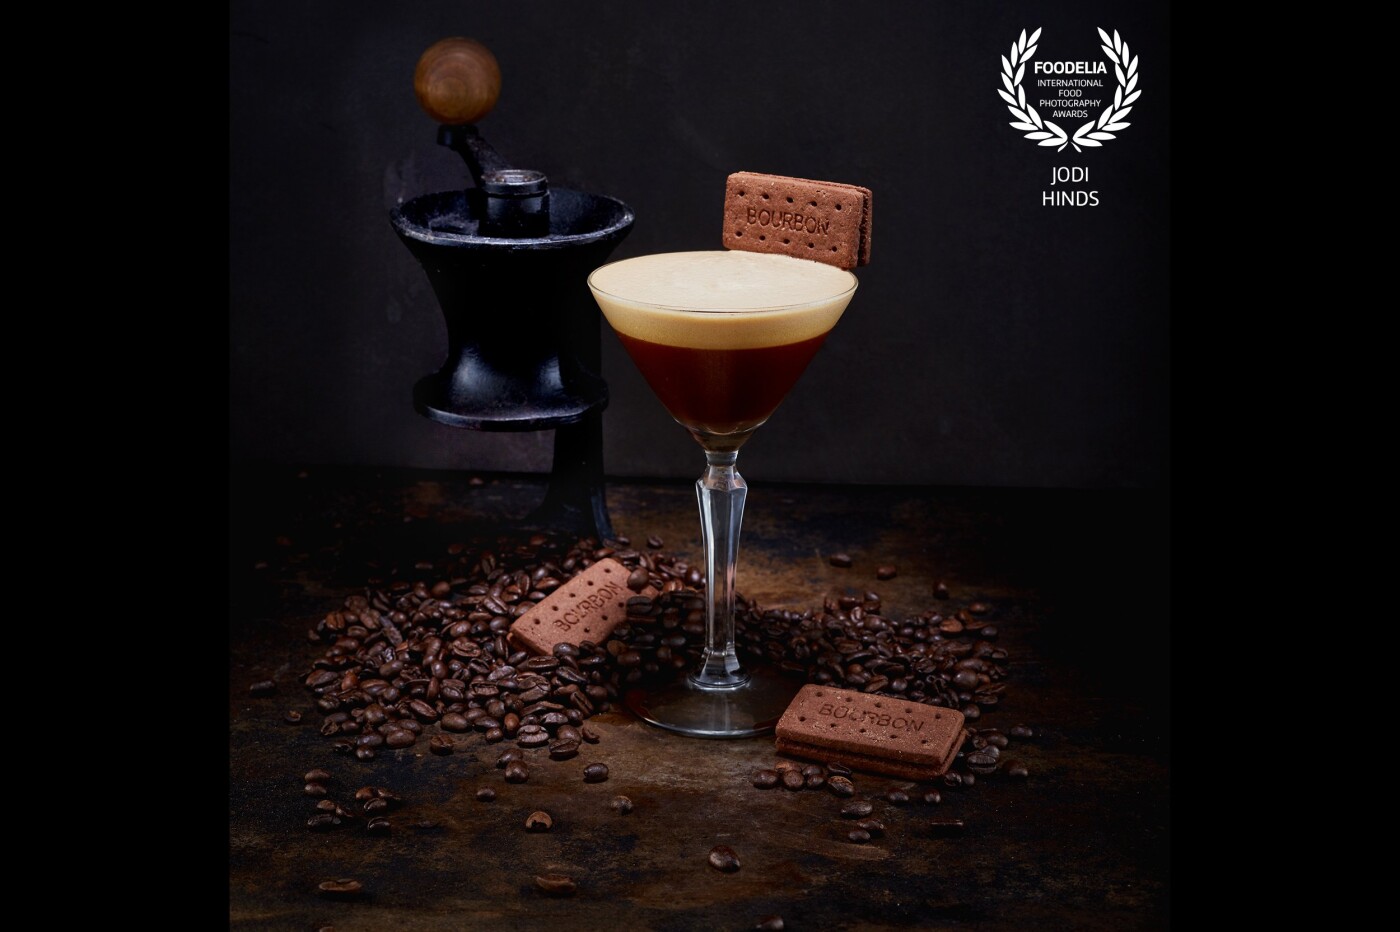 The espresso martini first featured in the early 1980's in London, so it's said.  Well JJ Goodman has put his own spin on it and adds a classic English bourbon biscuit to top it off.  This was shot as part of his incredible book to inspire home cocktail making.  It's going to be an amazing book - watch out for it!<br />
Kitchen Cocktails will be released in February 2018<br />
<br />
Creator @jjgoodmanbartender<br />
Venues @londoncocktailclub<br />
Publisher @rmc_books<br />
Photographer @jodihindsphoto